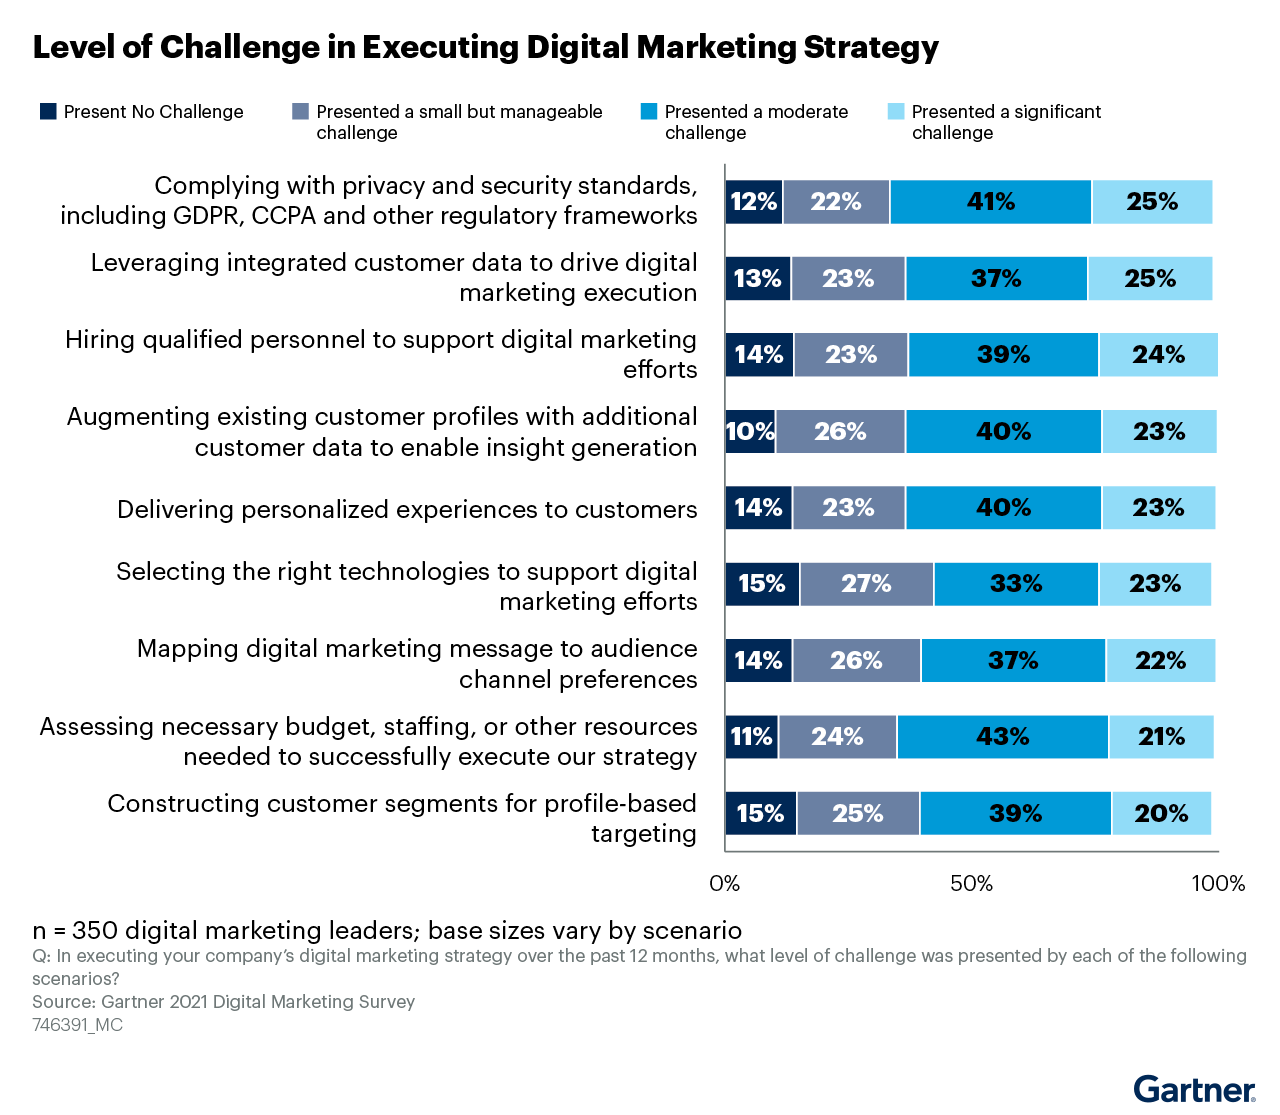 Key challenges for digital marketing leaders in 2021 and 2022